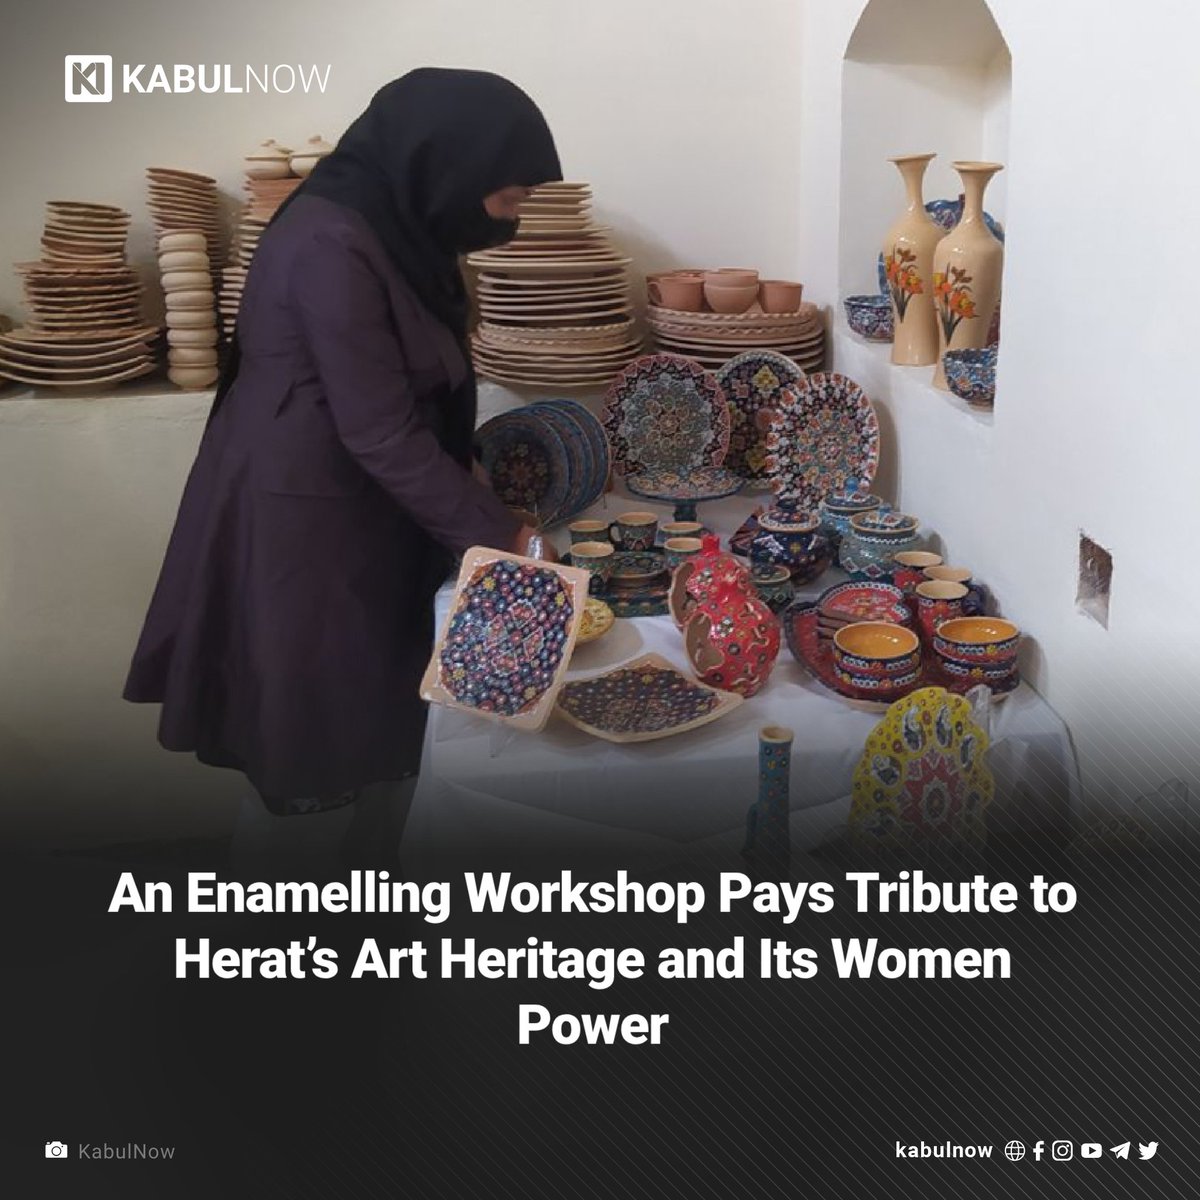 'Perhaps overwhelmed by the Taliban’s erasure of women from public life, many forget that the golden era of Islamic civilization in Herat was made possible under the Timurid queen Gawhar Shad Begum, who harvested her power in the patronage of art.' kabulnow.com